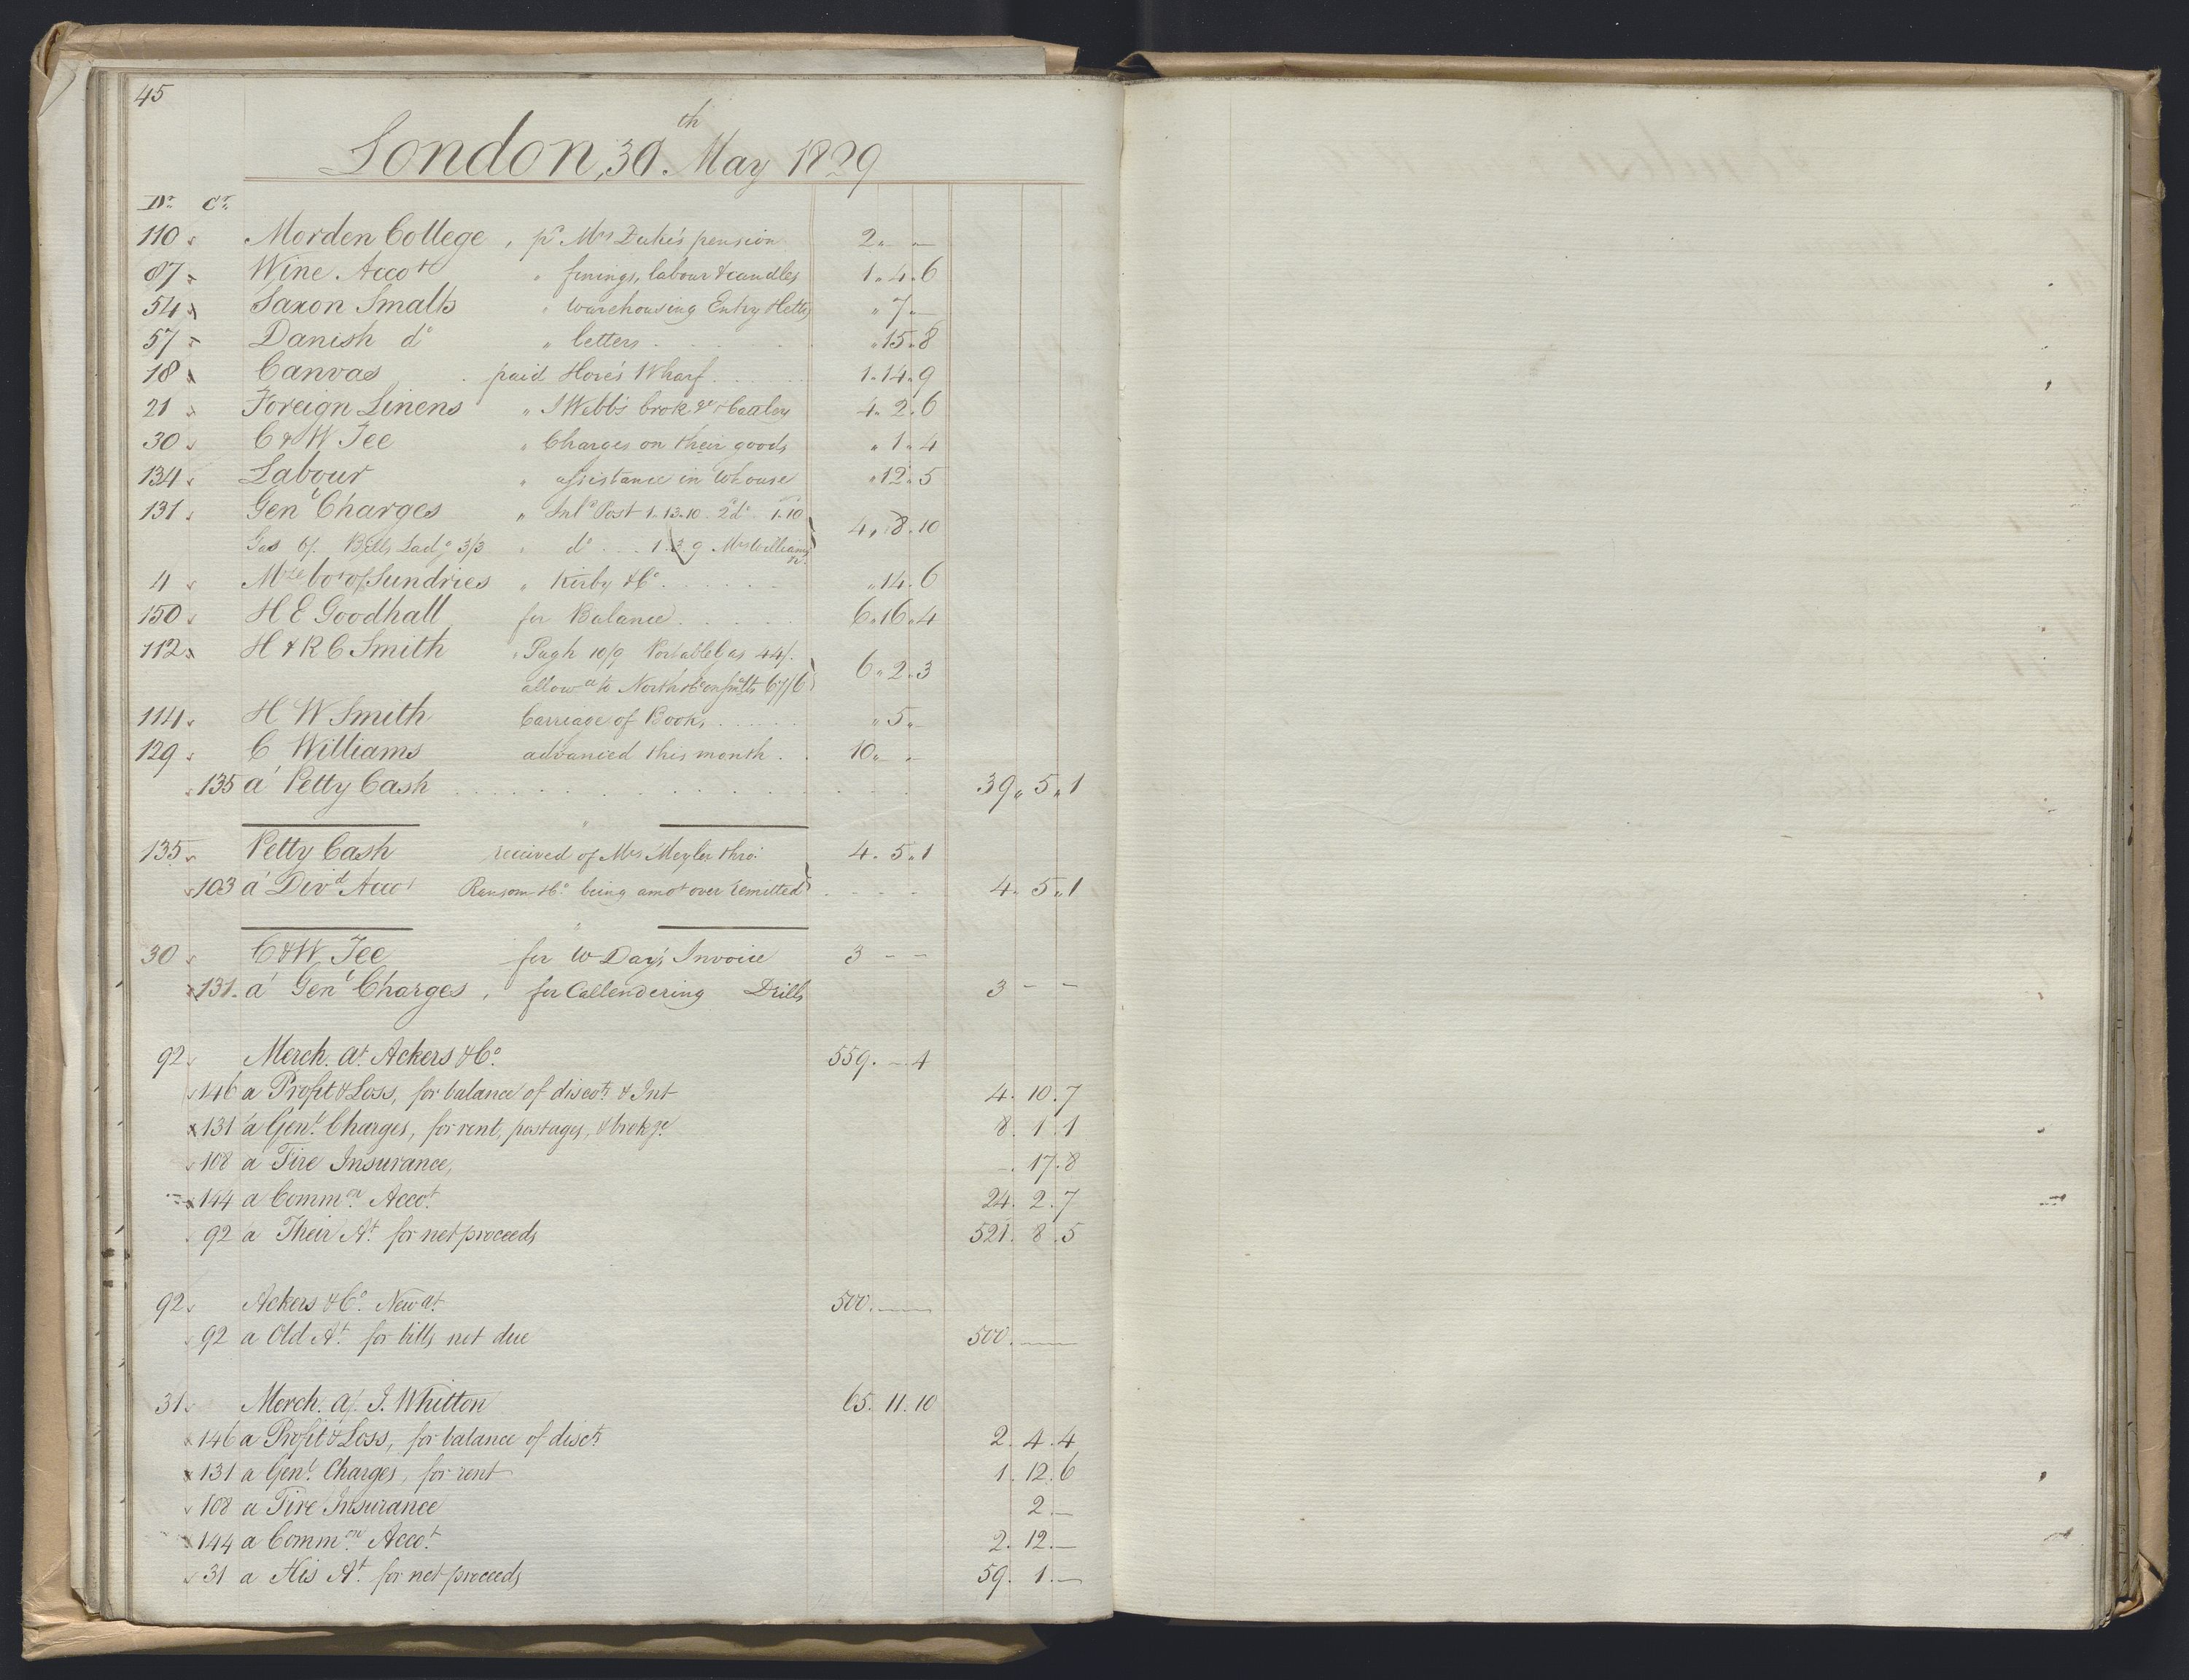 Smith, Goodhall & Reeves, RA/PA-0586/R/L0001: Dagbok (Daybook) A, 1829-1831, p. 45-46